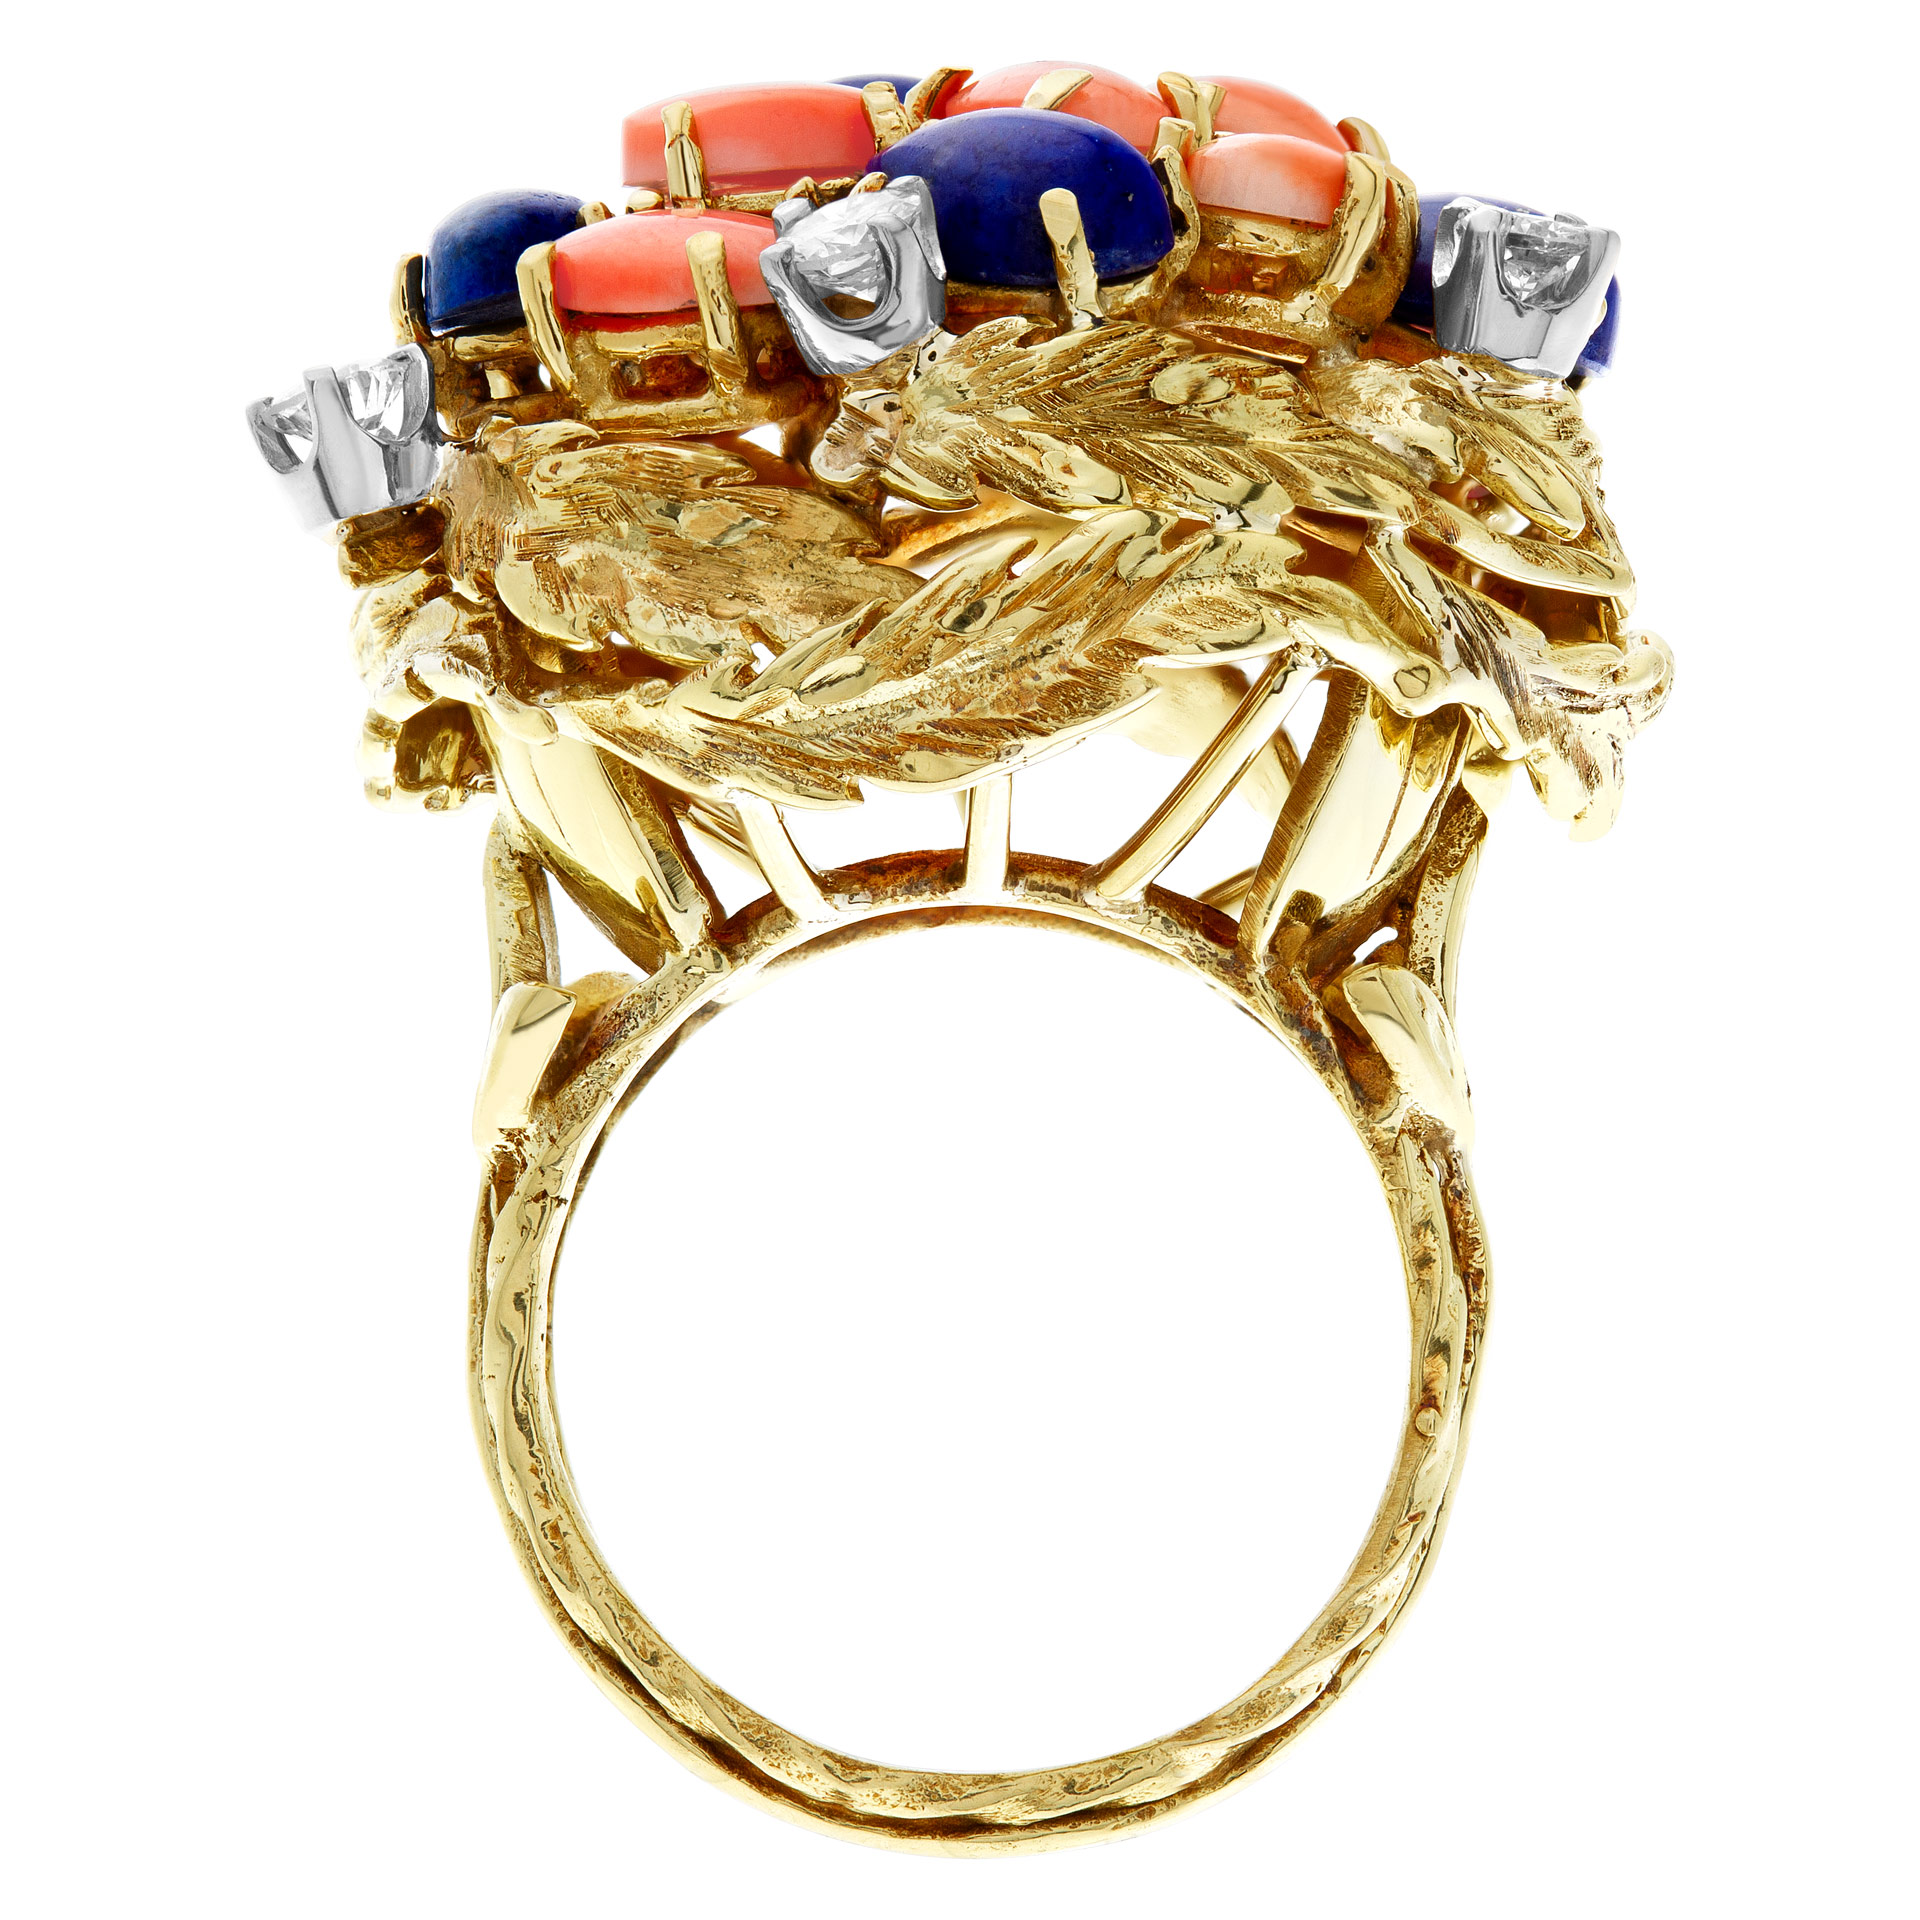 Lapiz lazuli & coral garden ring in 18k yellow gold with diamond accents image 5